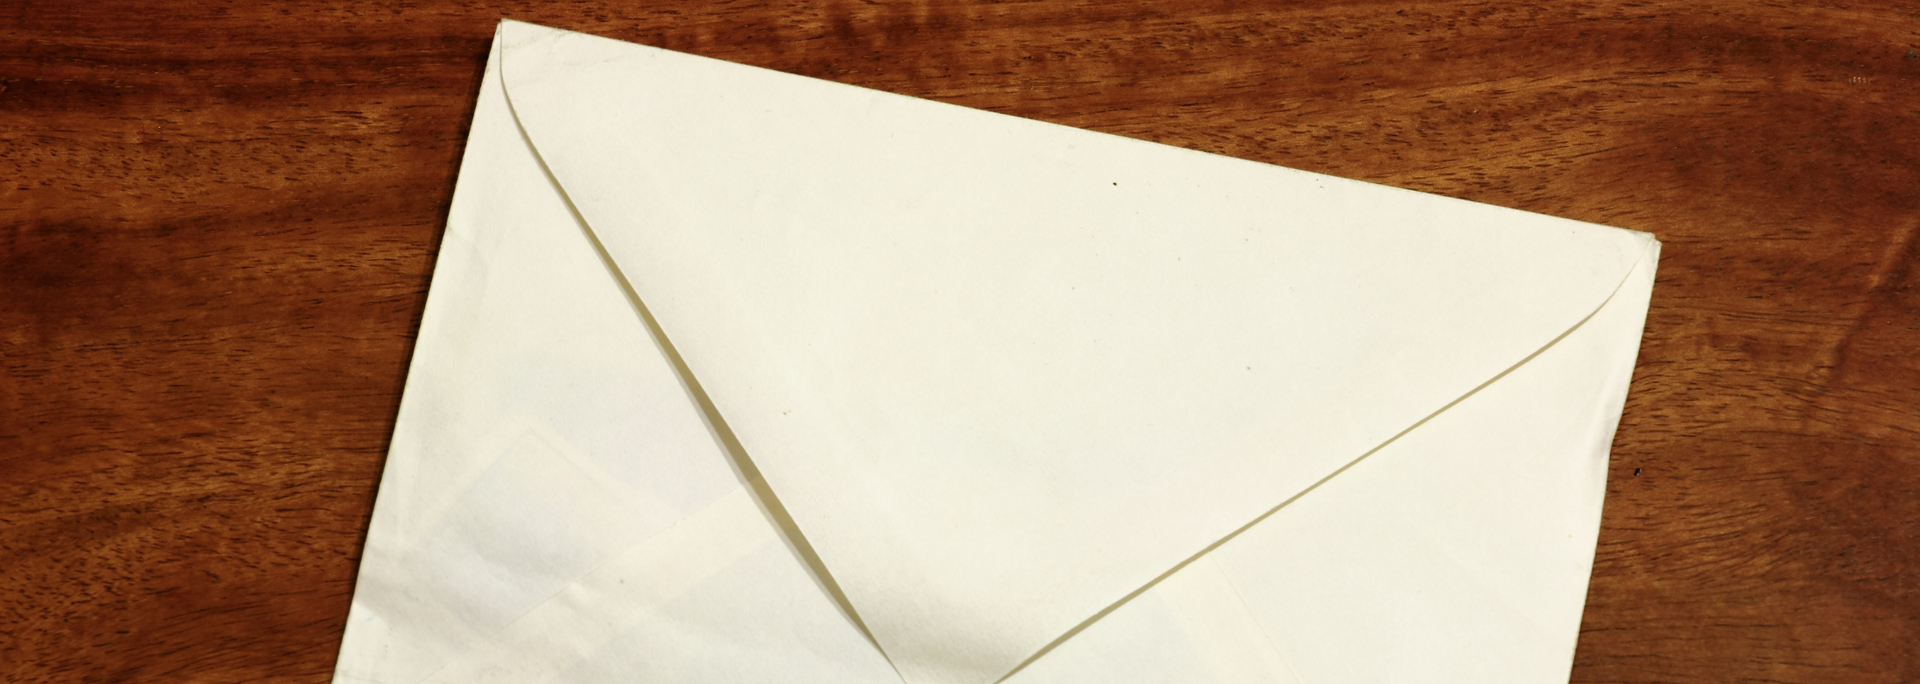 Picture of a large envelope